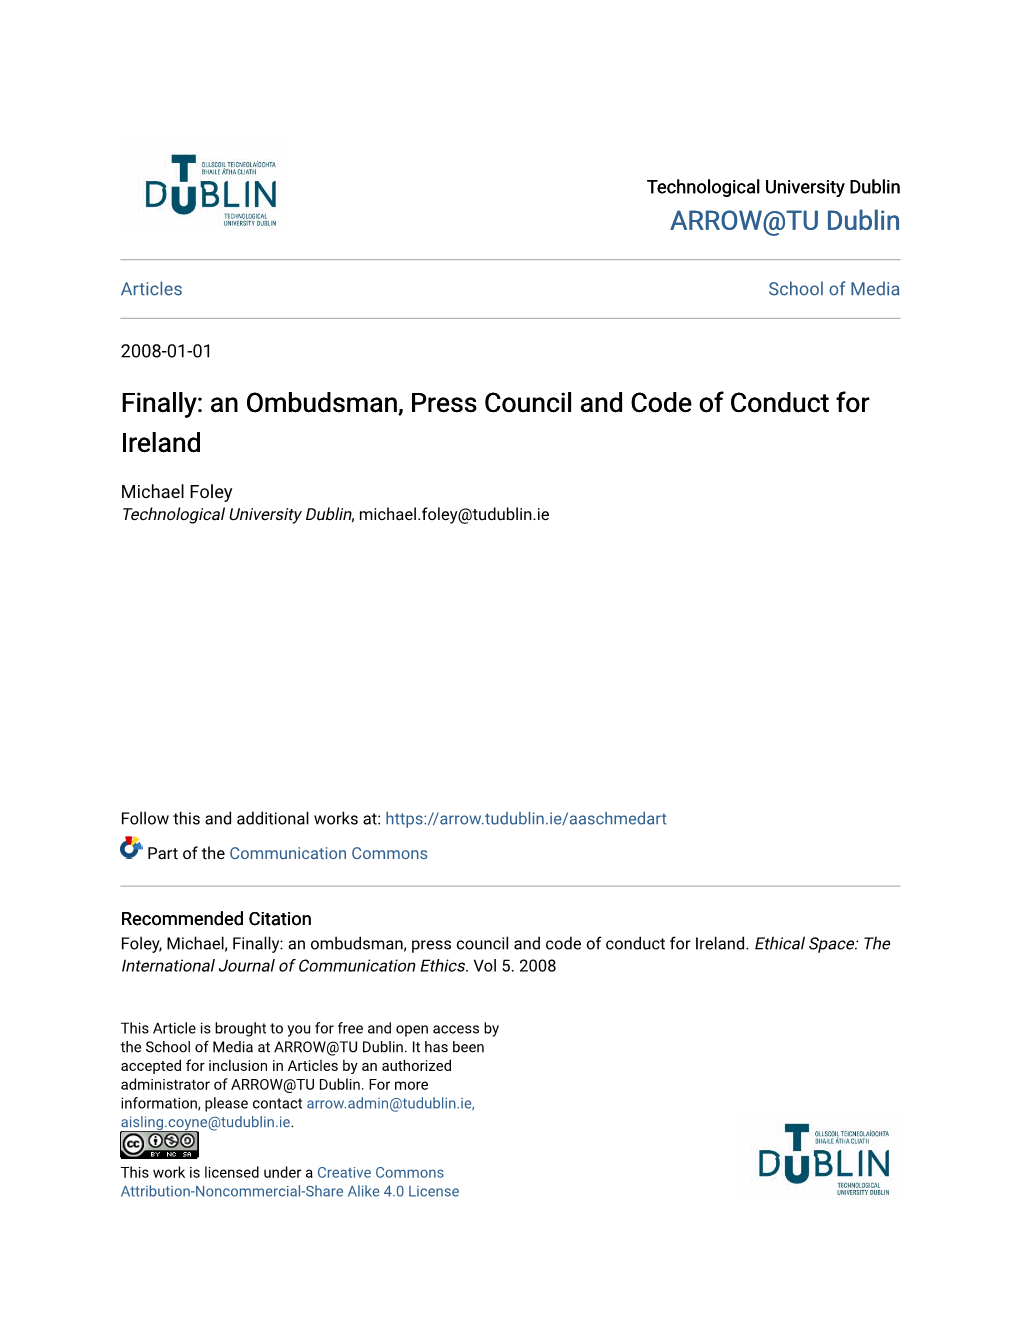 An Ombudsman, Press Council and Code of Conduct for Ireland